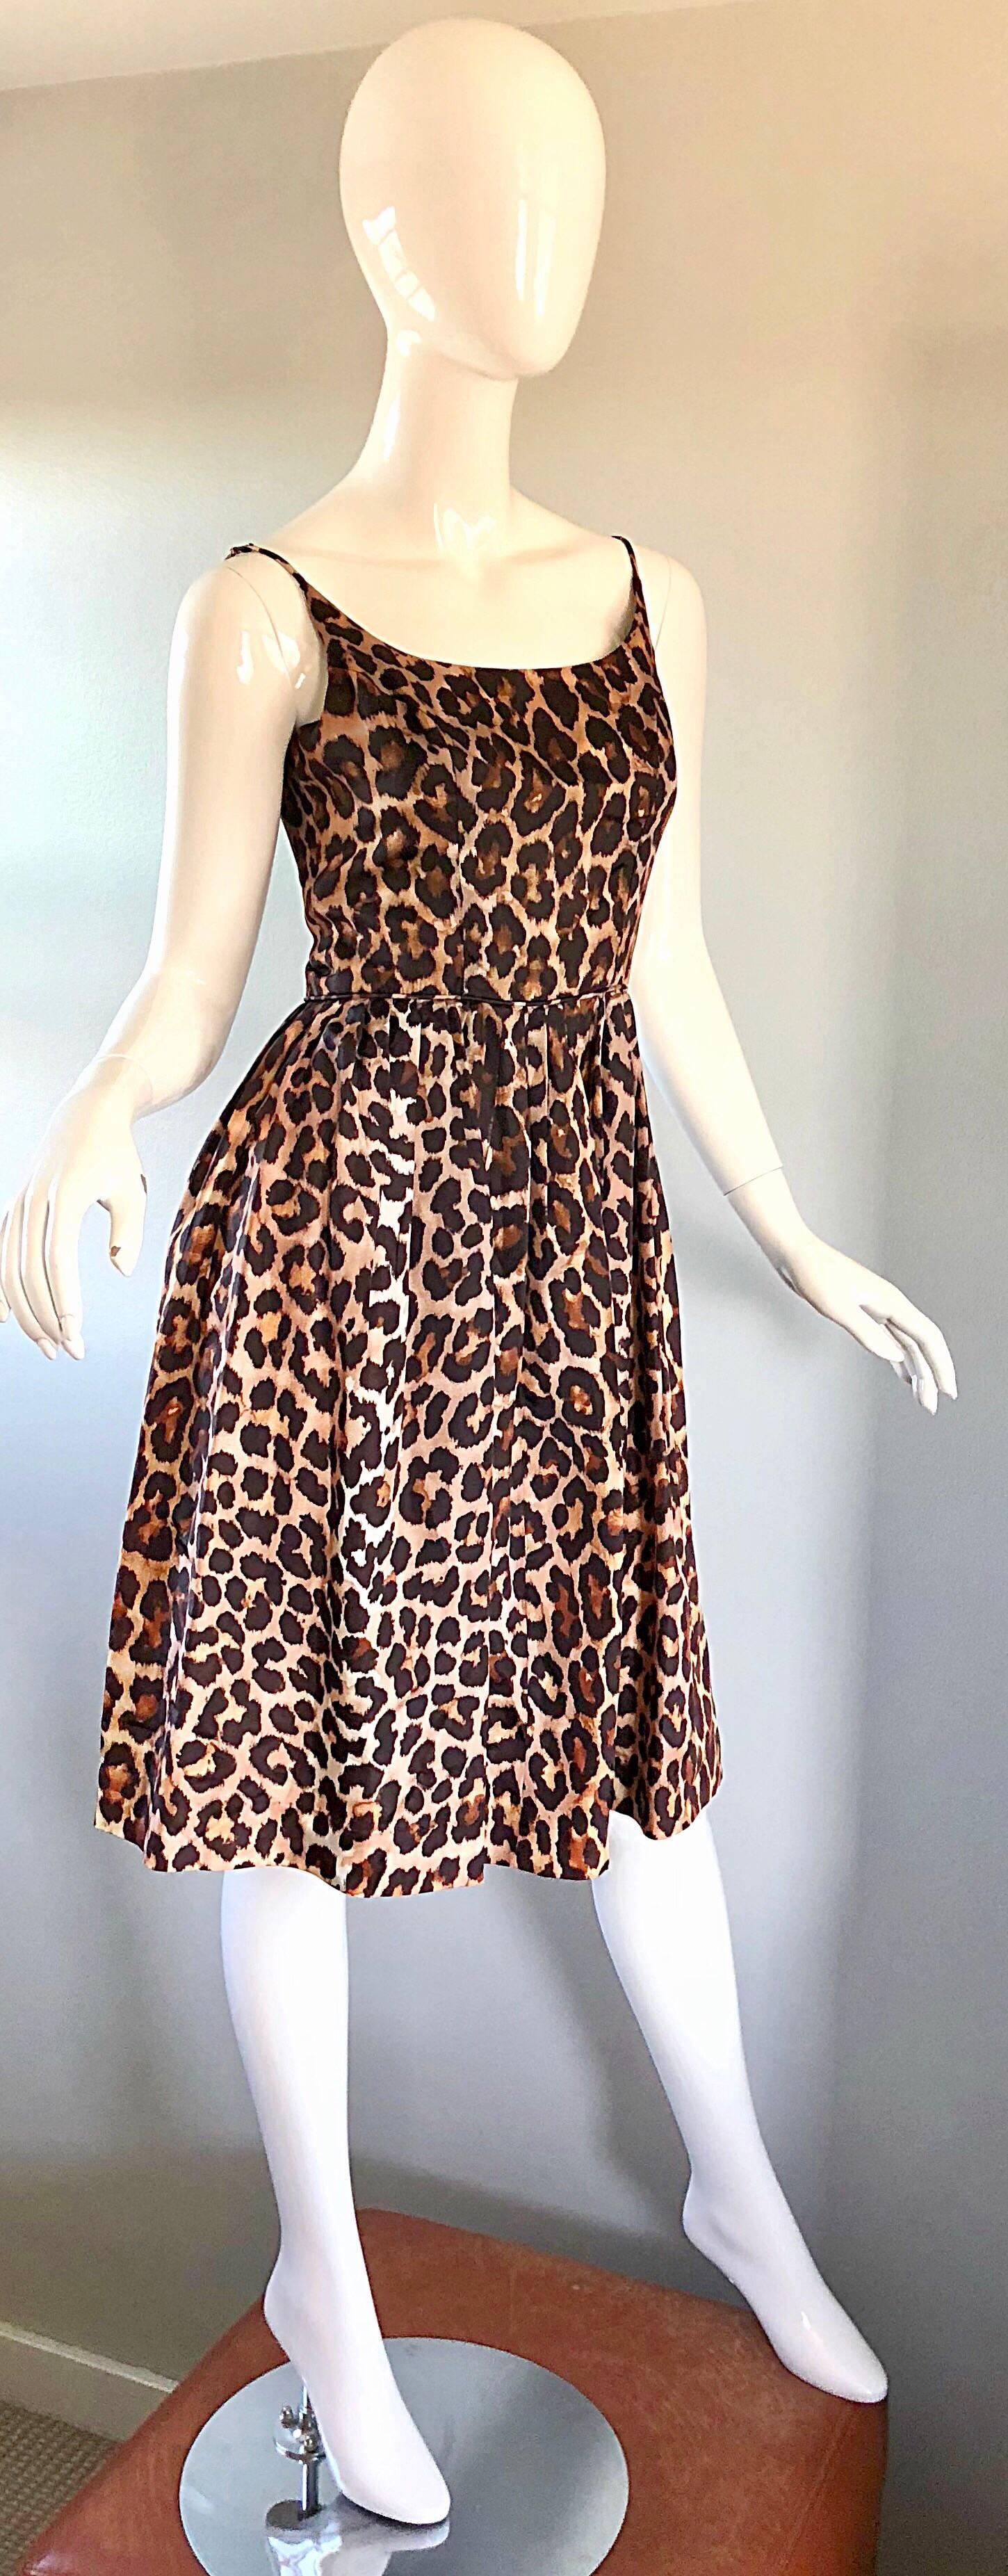 Gorgeous 1950s Demi Couture Leopard Cheetah Print Silk Fit n' Flare 50s Dress In Excellent Condition For Sale In San Diego, CA